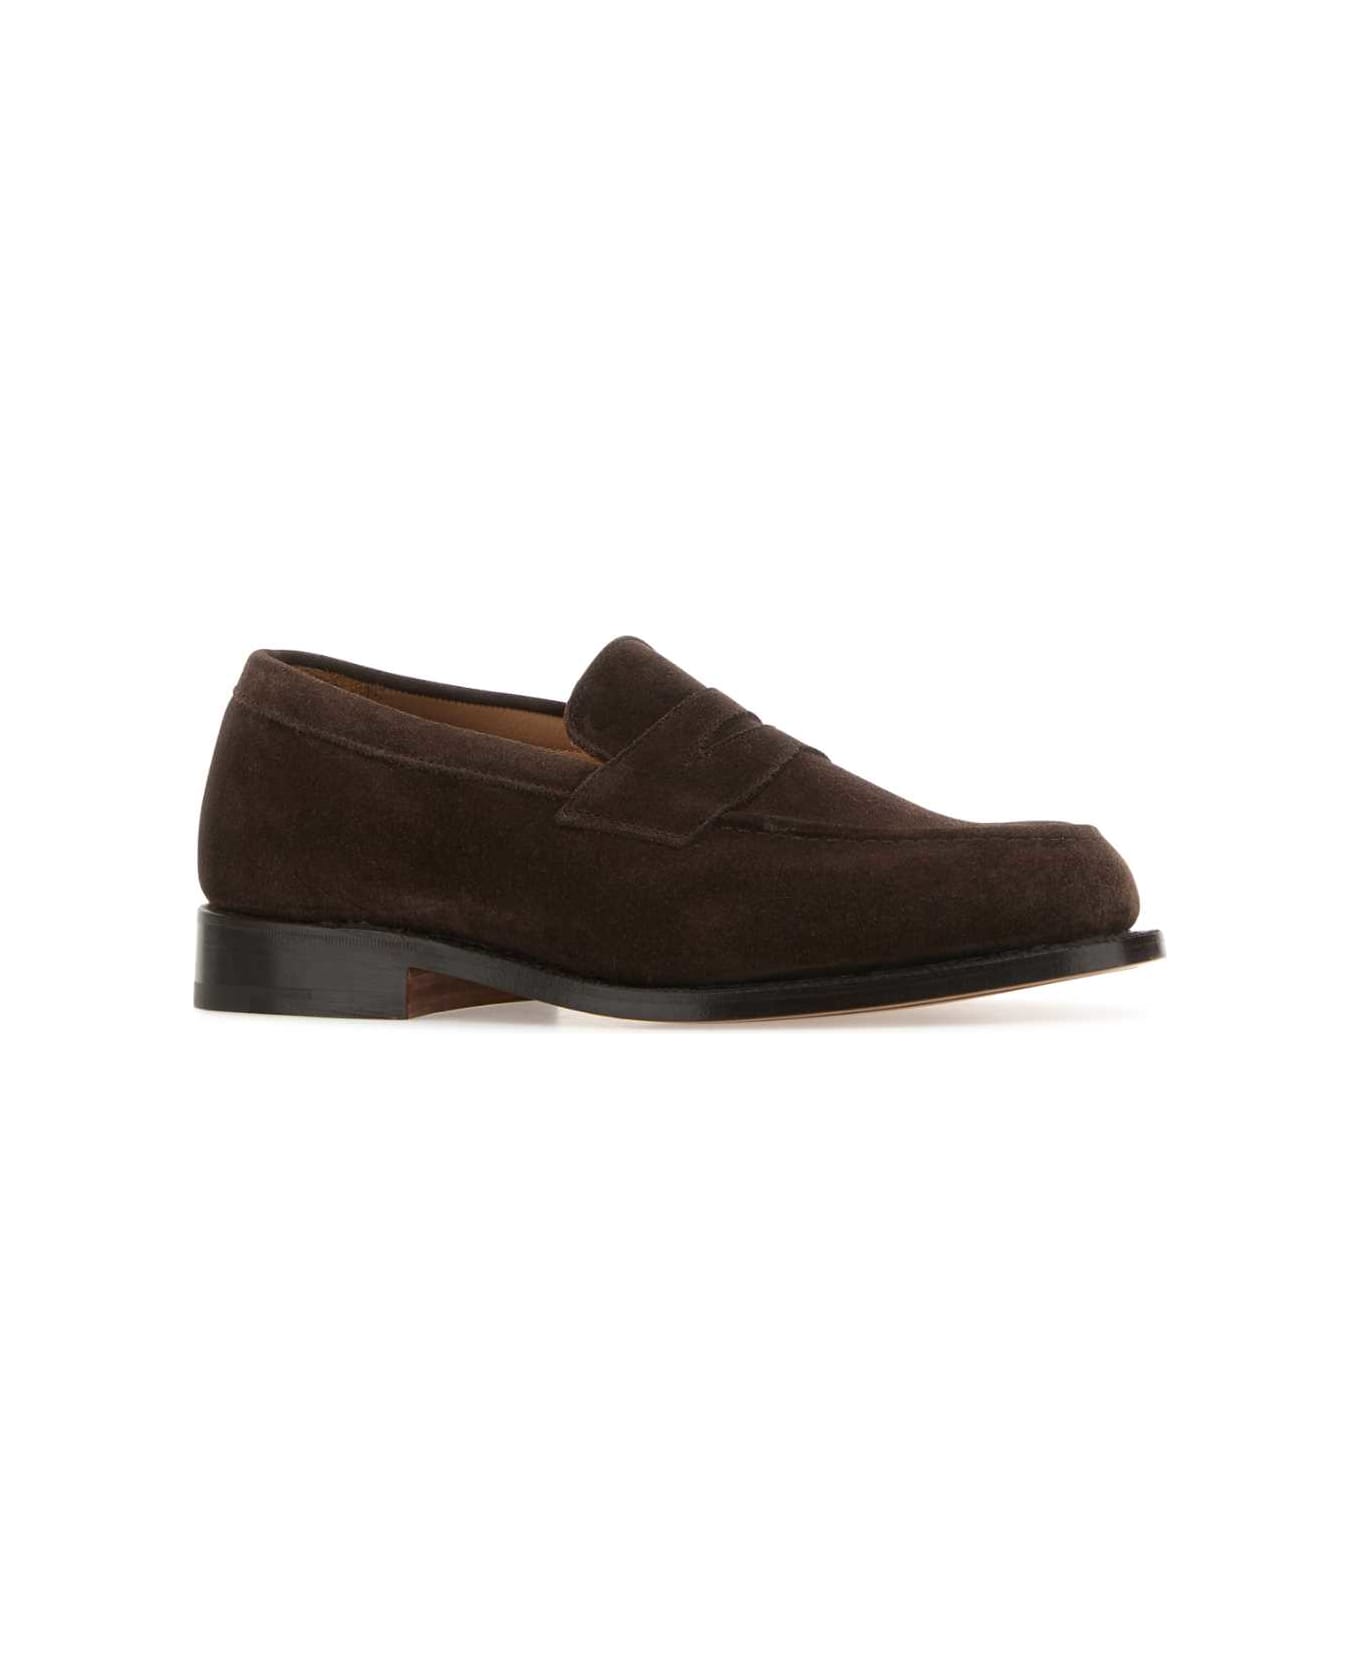 Tricker's Brown Suede Repello Loafers - CAFE